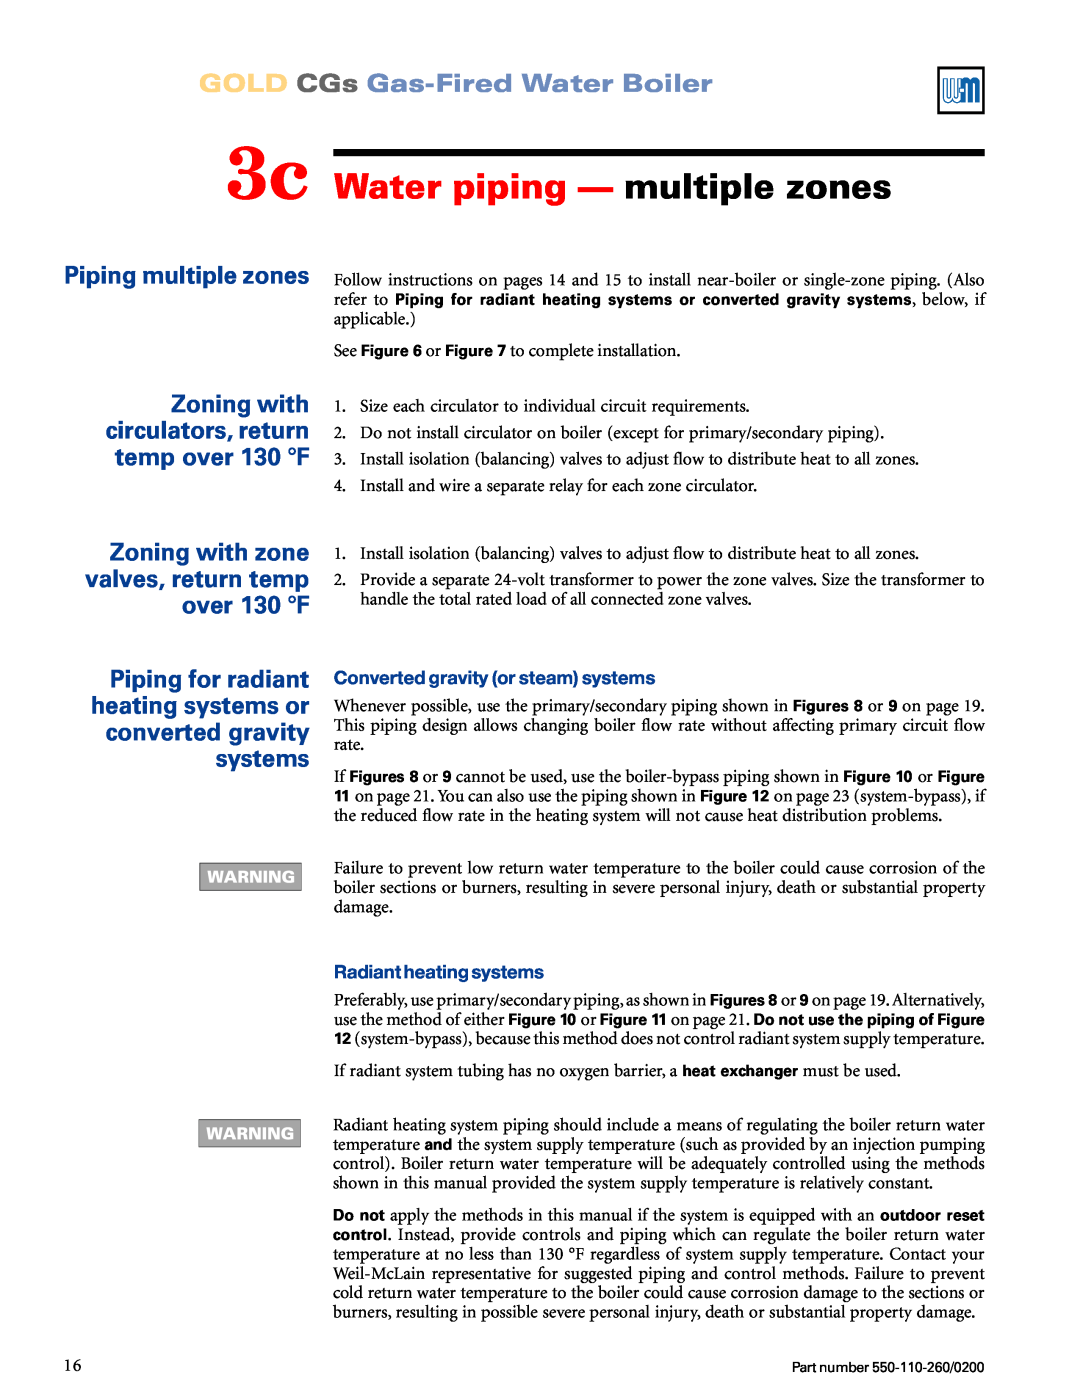 Weil-McLain 550-110-260/02002 manual 3c Water piping — multiple zones, Zoning with zone valves, return temp over 130 F 